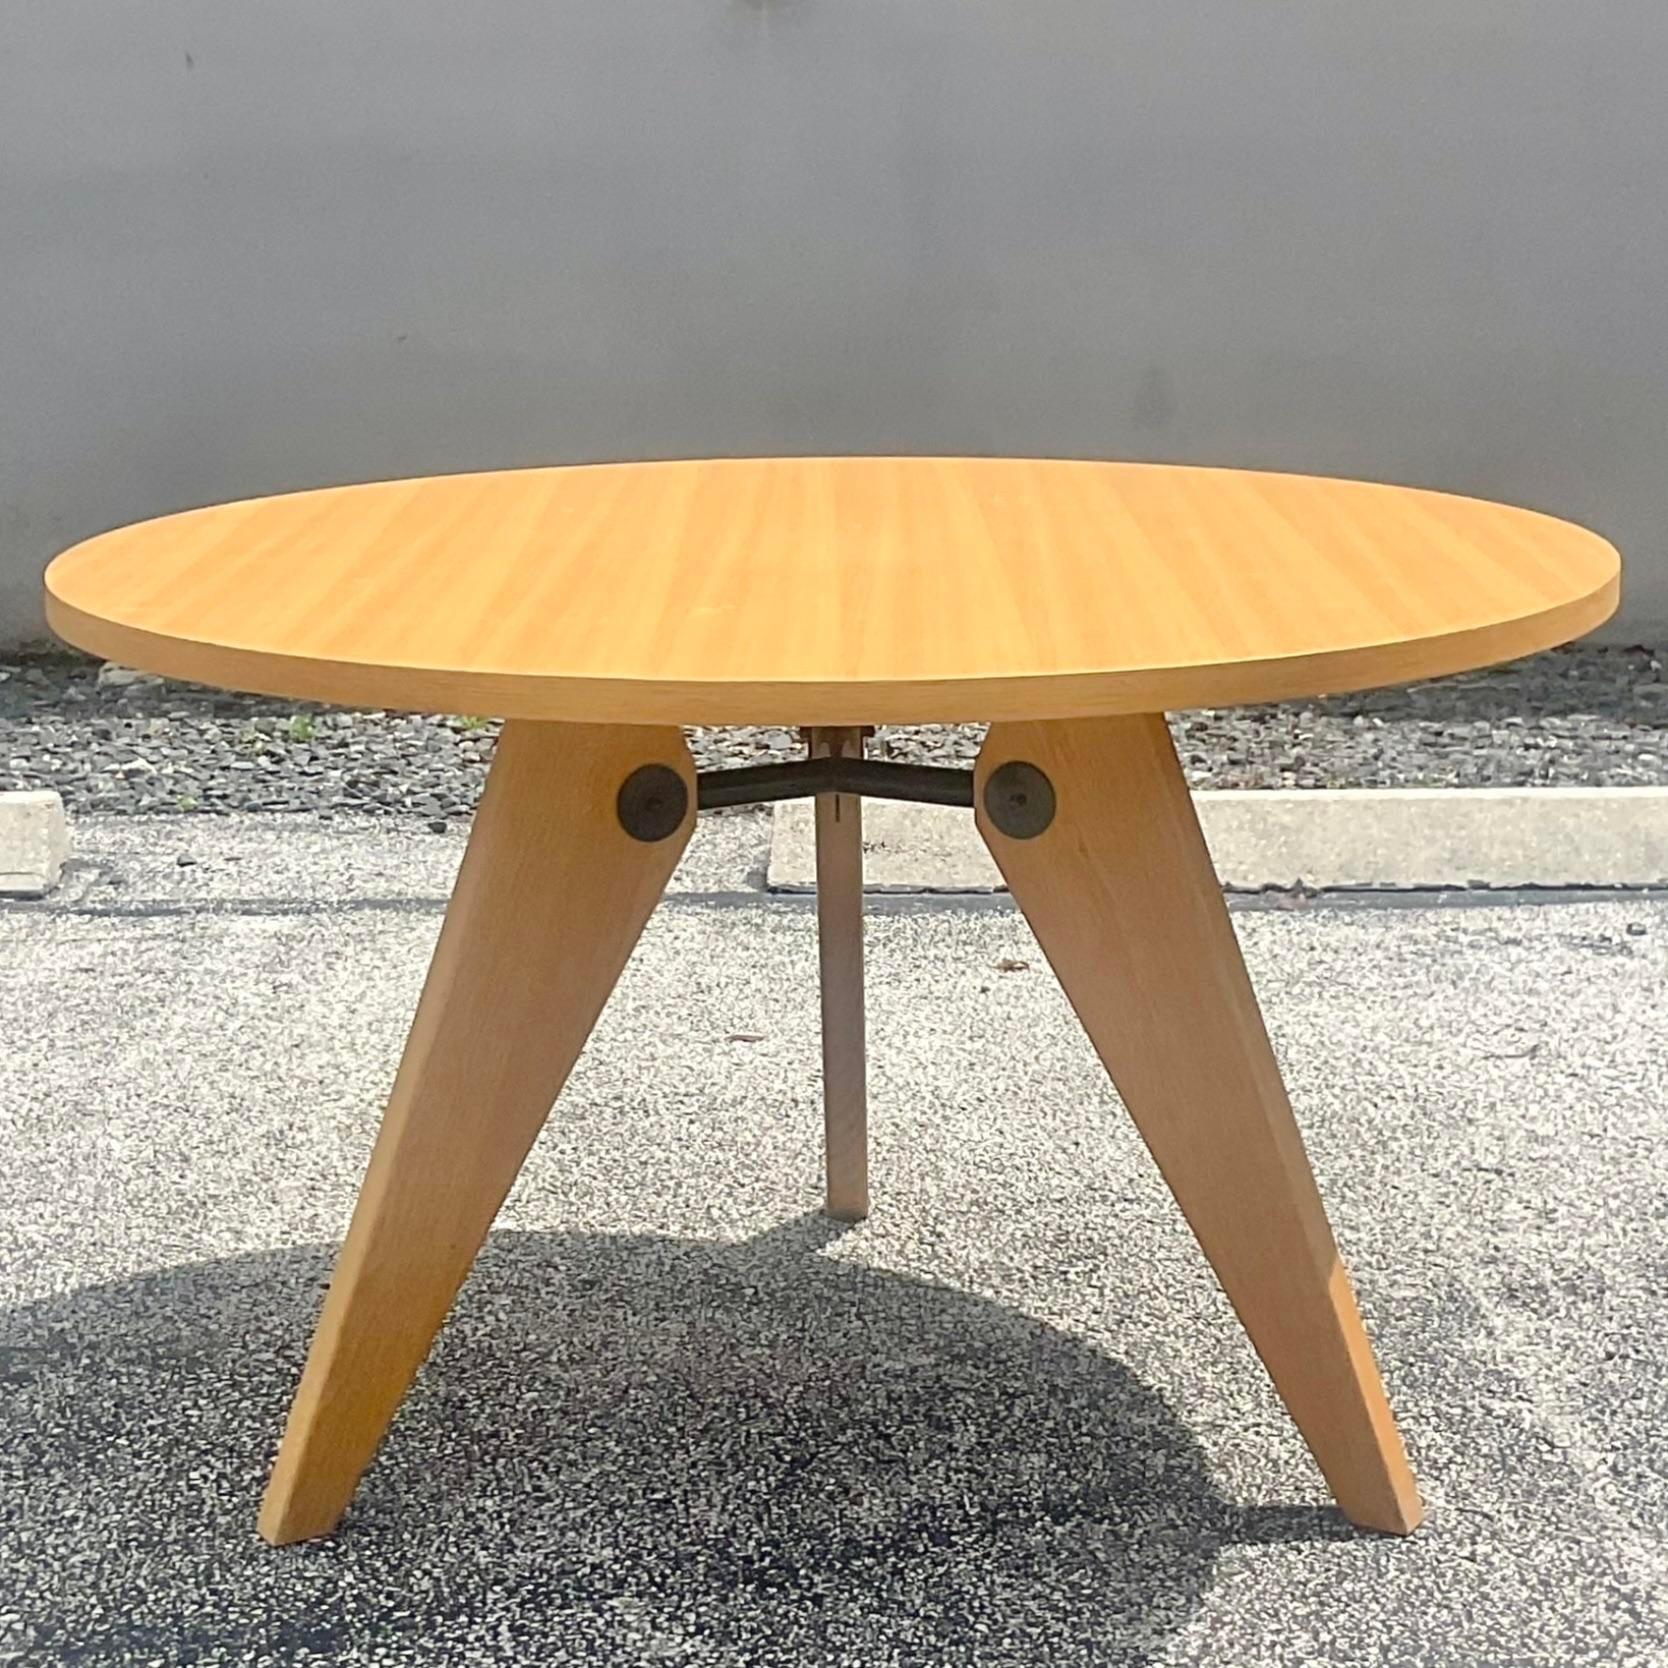 A fabulous vintage Boho dining table. The iconic Gueriodon table designed in the manner of Jean Prouve. Beautiful oak frame with beautiful wood grain detail. Acquired from a Palm Beach estate.